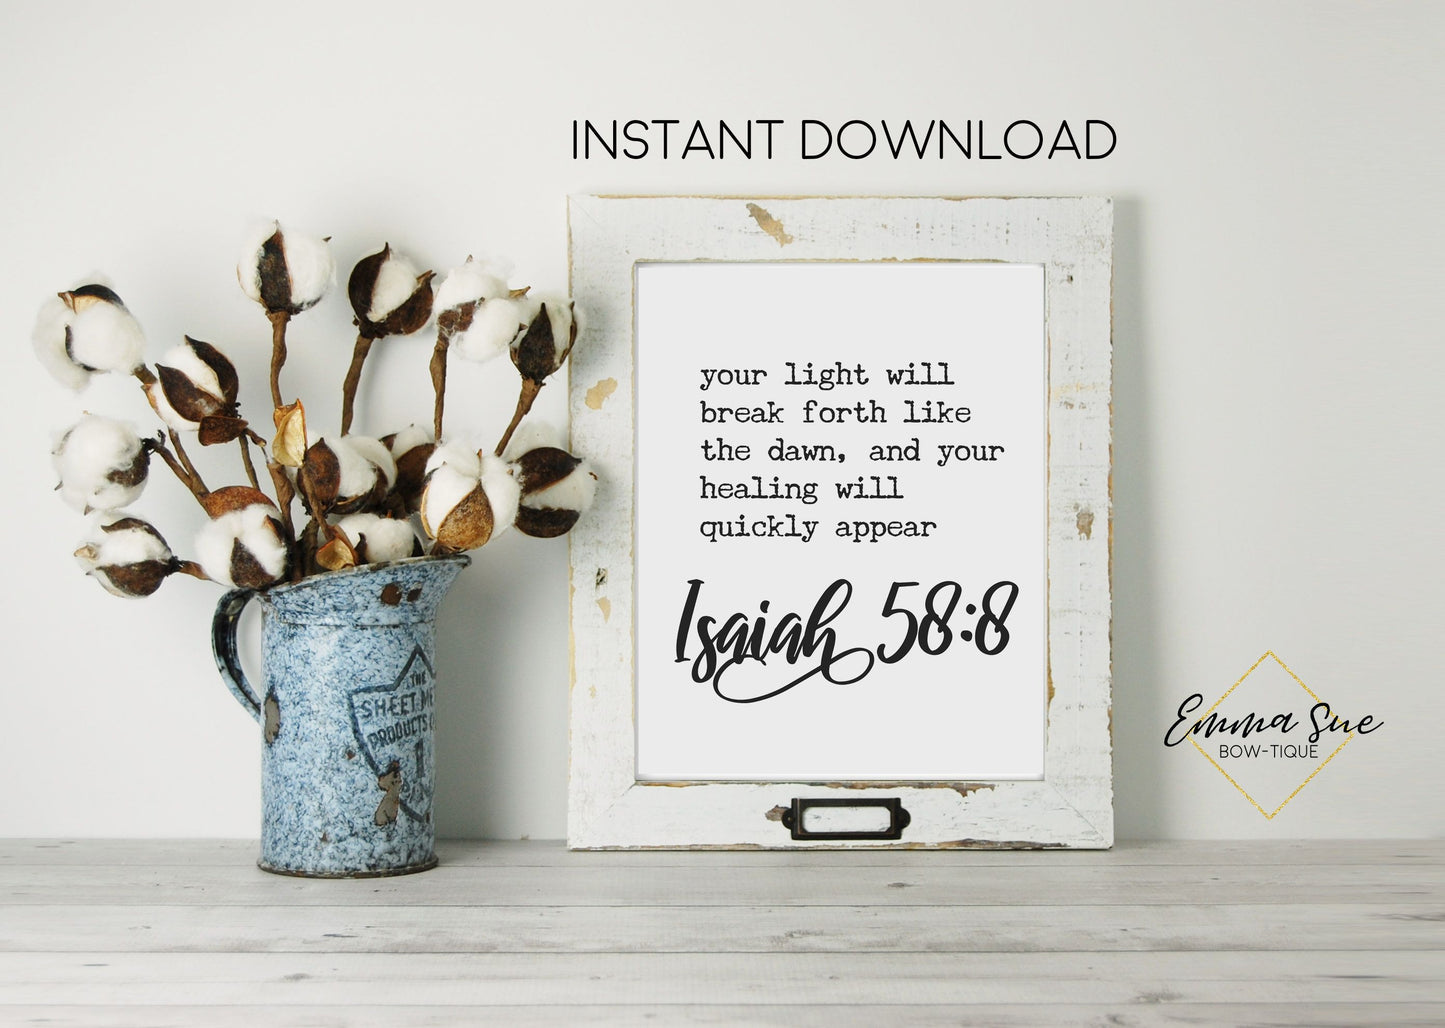 Your Light will break forth like the dawn and your healing will quickly appear Isaiah 58:8 Bible Verse Printable Art Sign